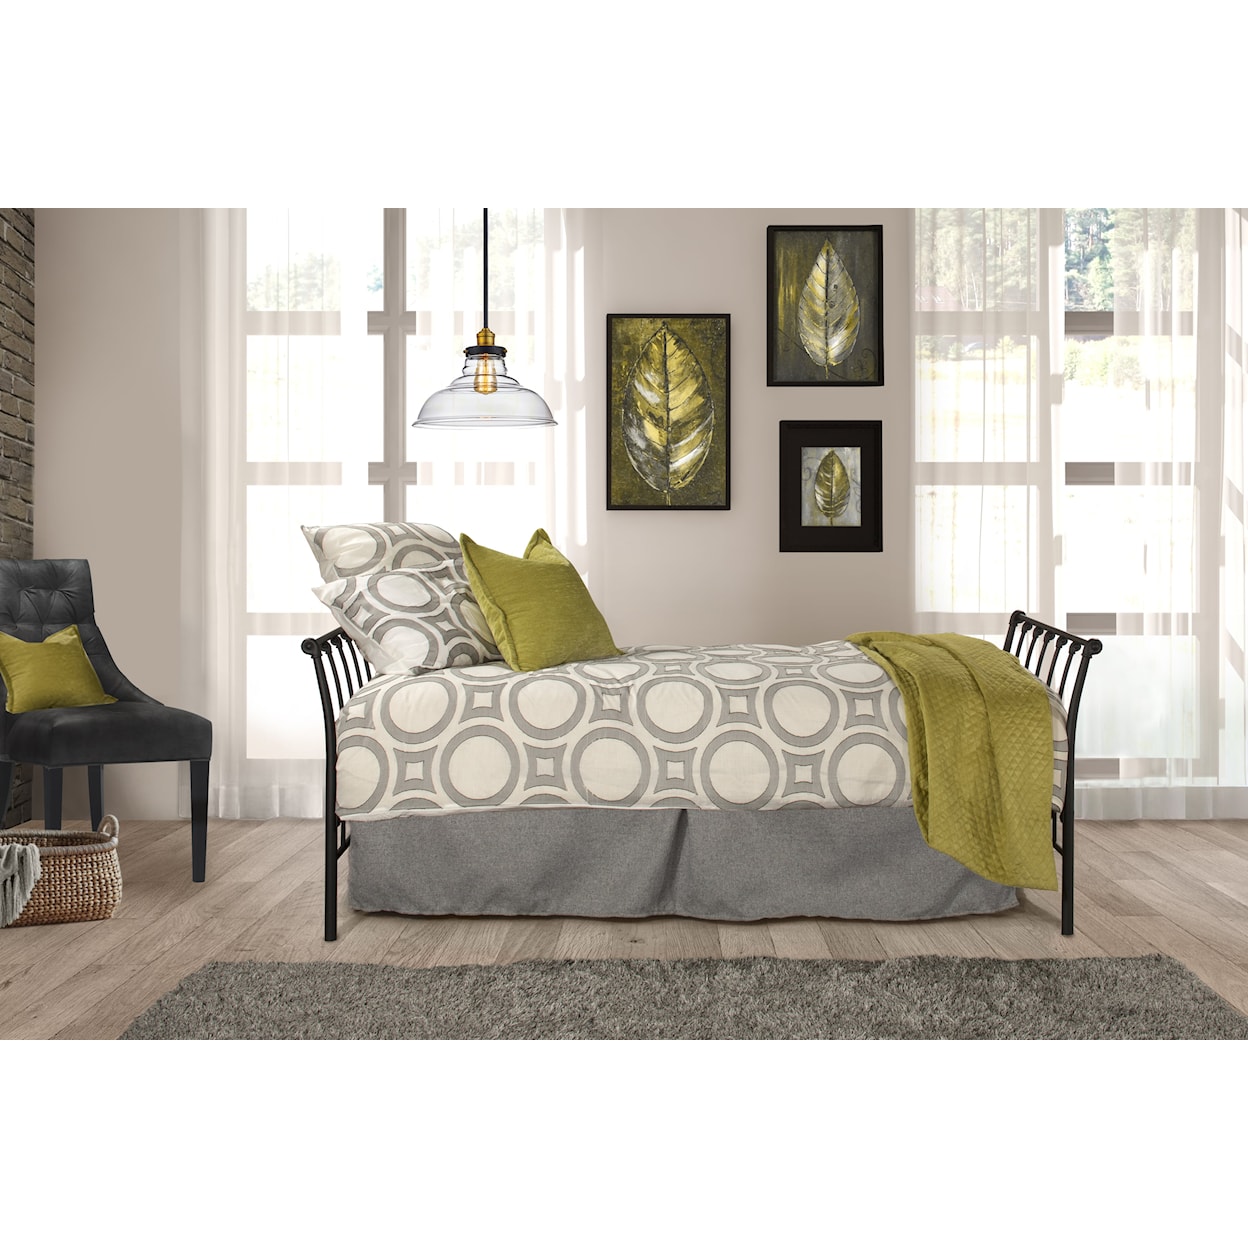 Hillsdale Midland Metal Twin Daybed